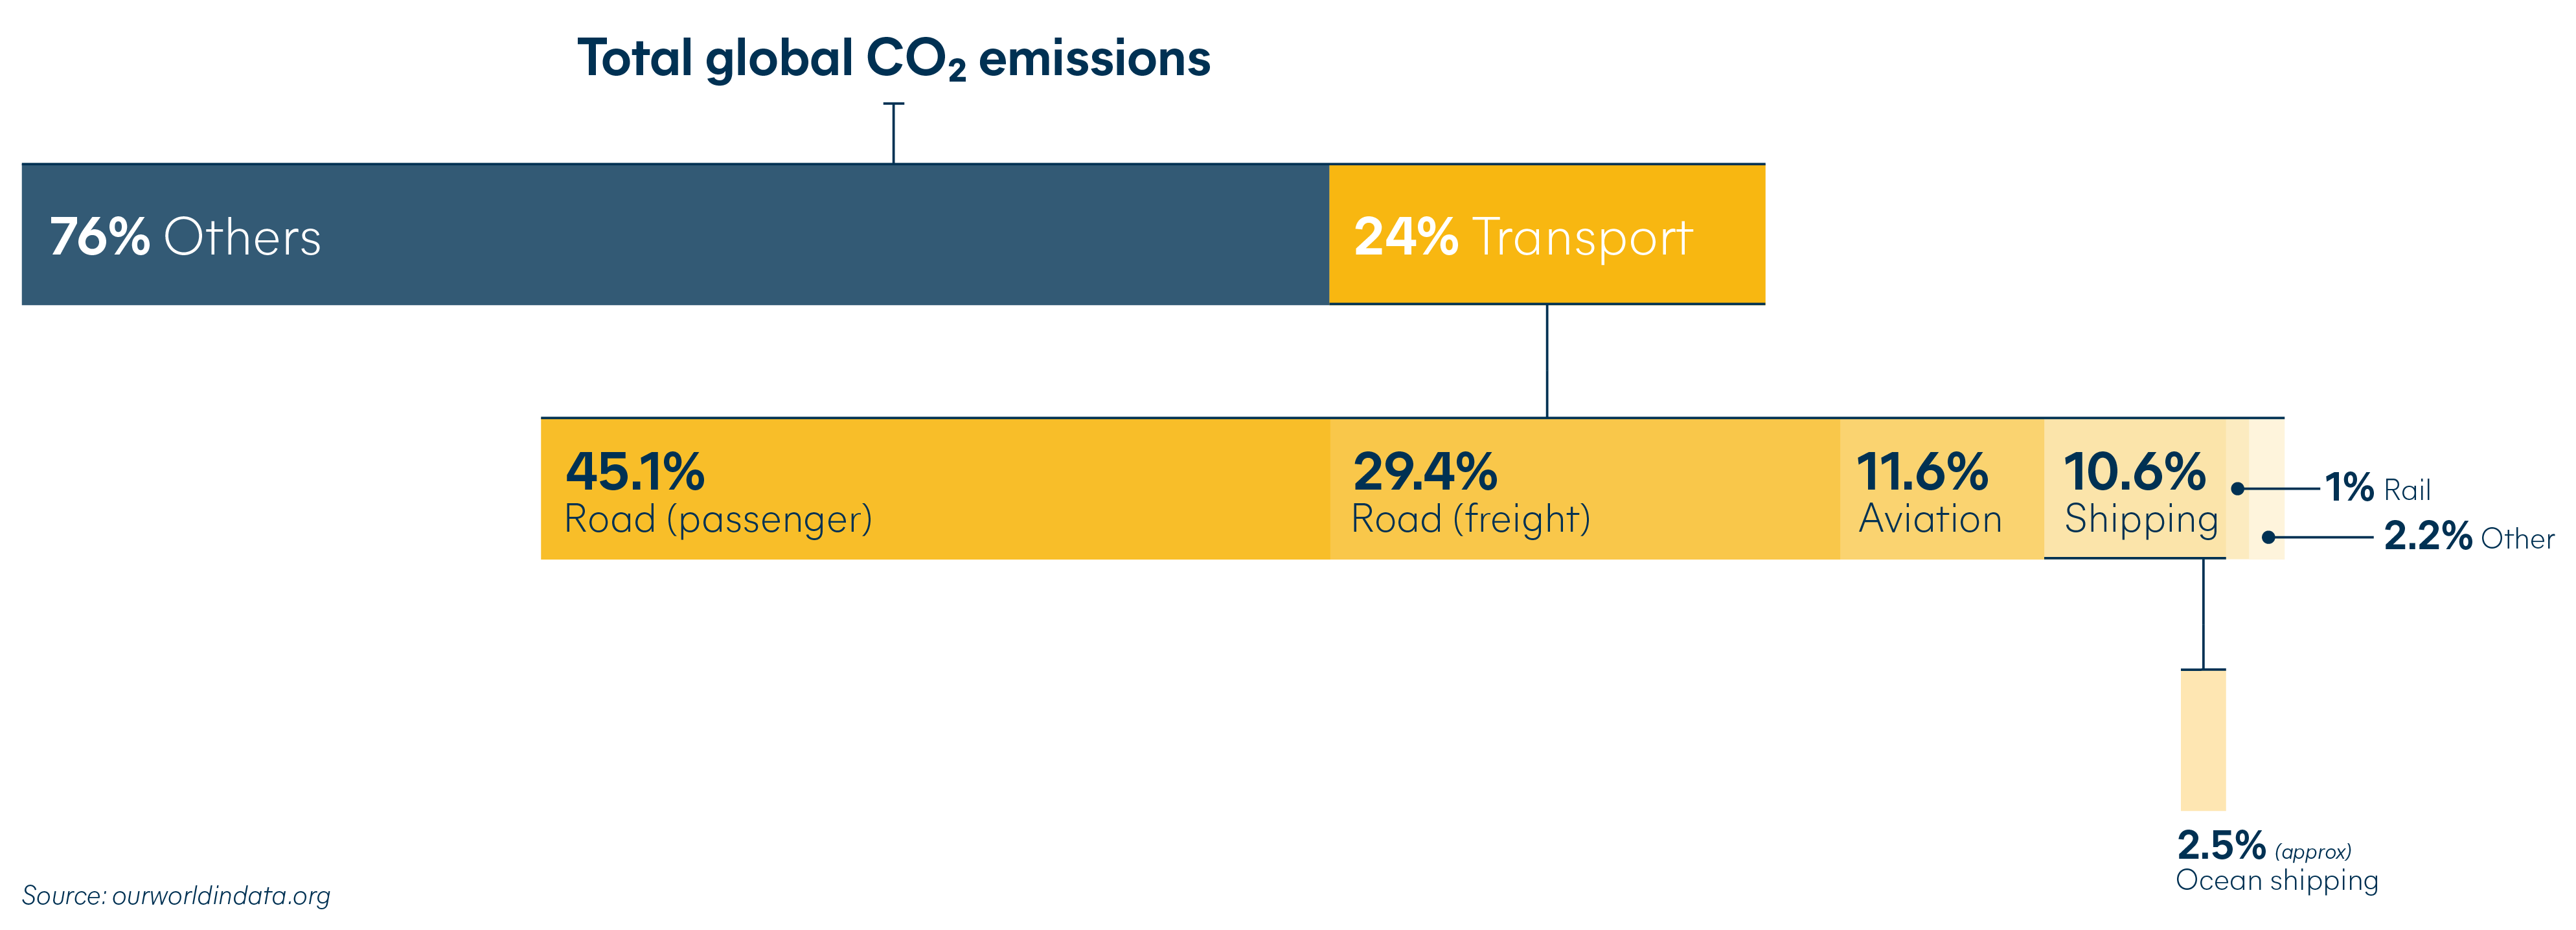 decarbonize transprot total global CO2 emissions